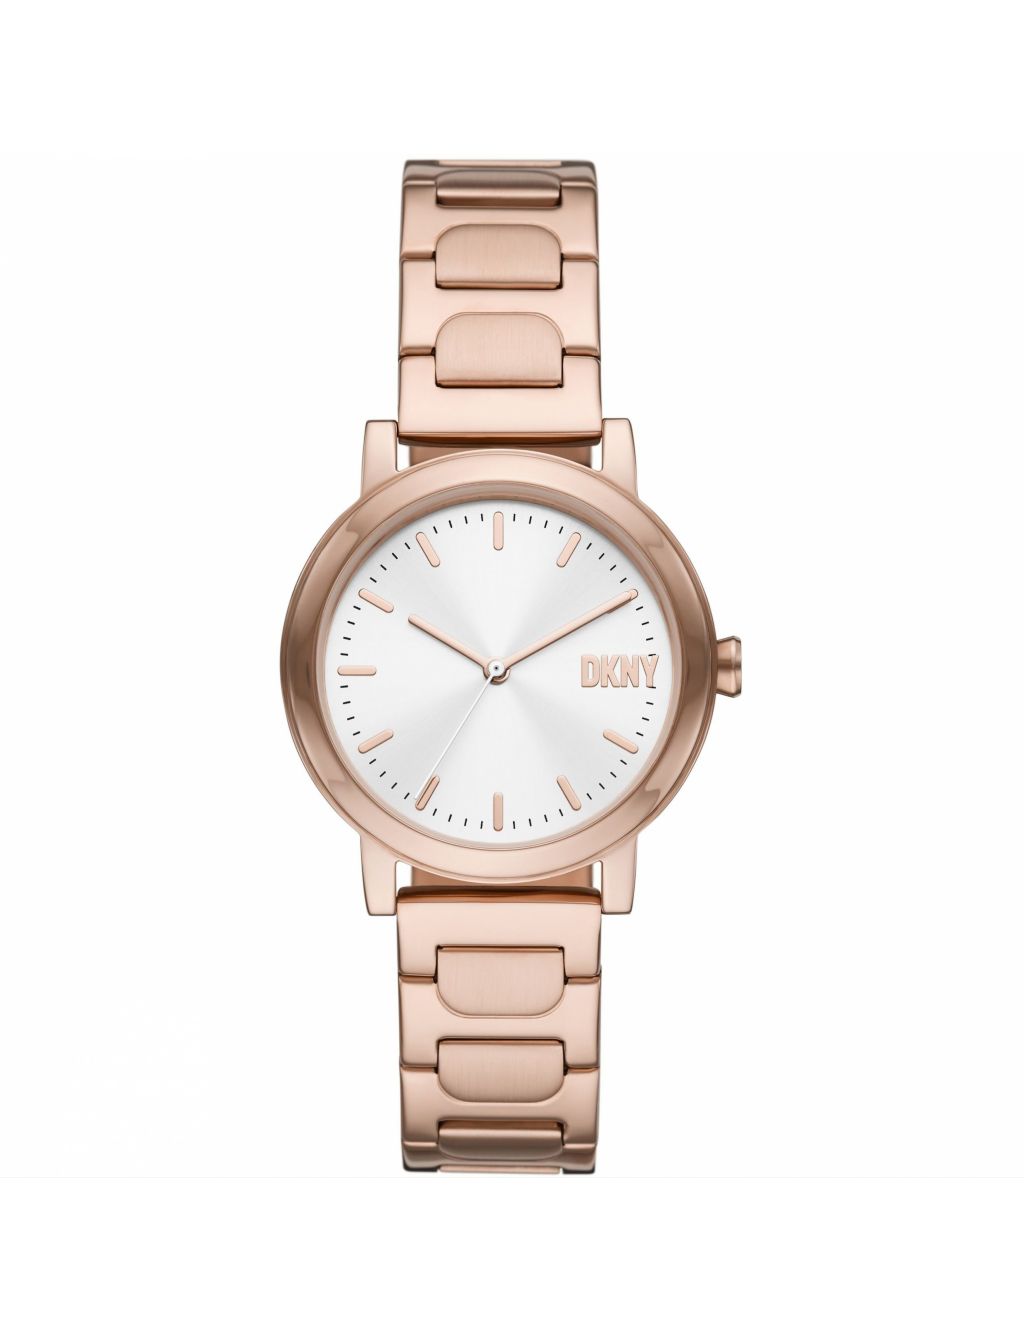 DKNY 7th Avenue Rose Gold Stainless Steel Watch image 1